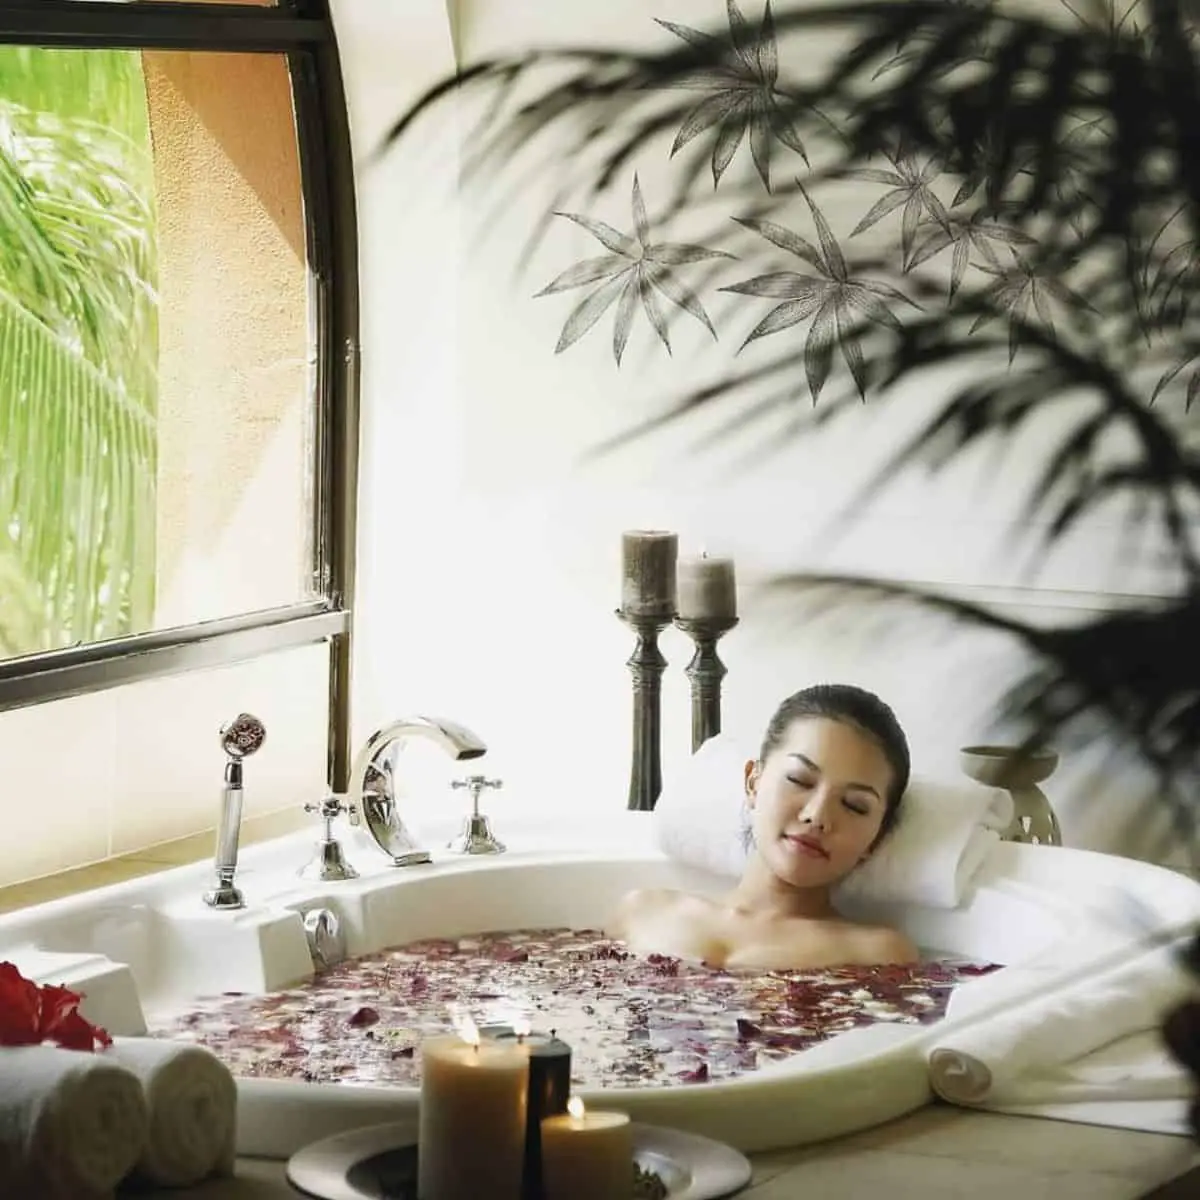 A lady soaking and enjoying her massage and spa treatment in ParkRoyal Penang Spa resort